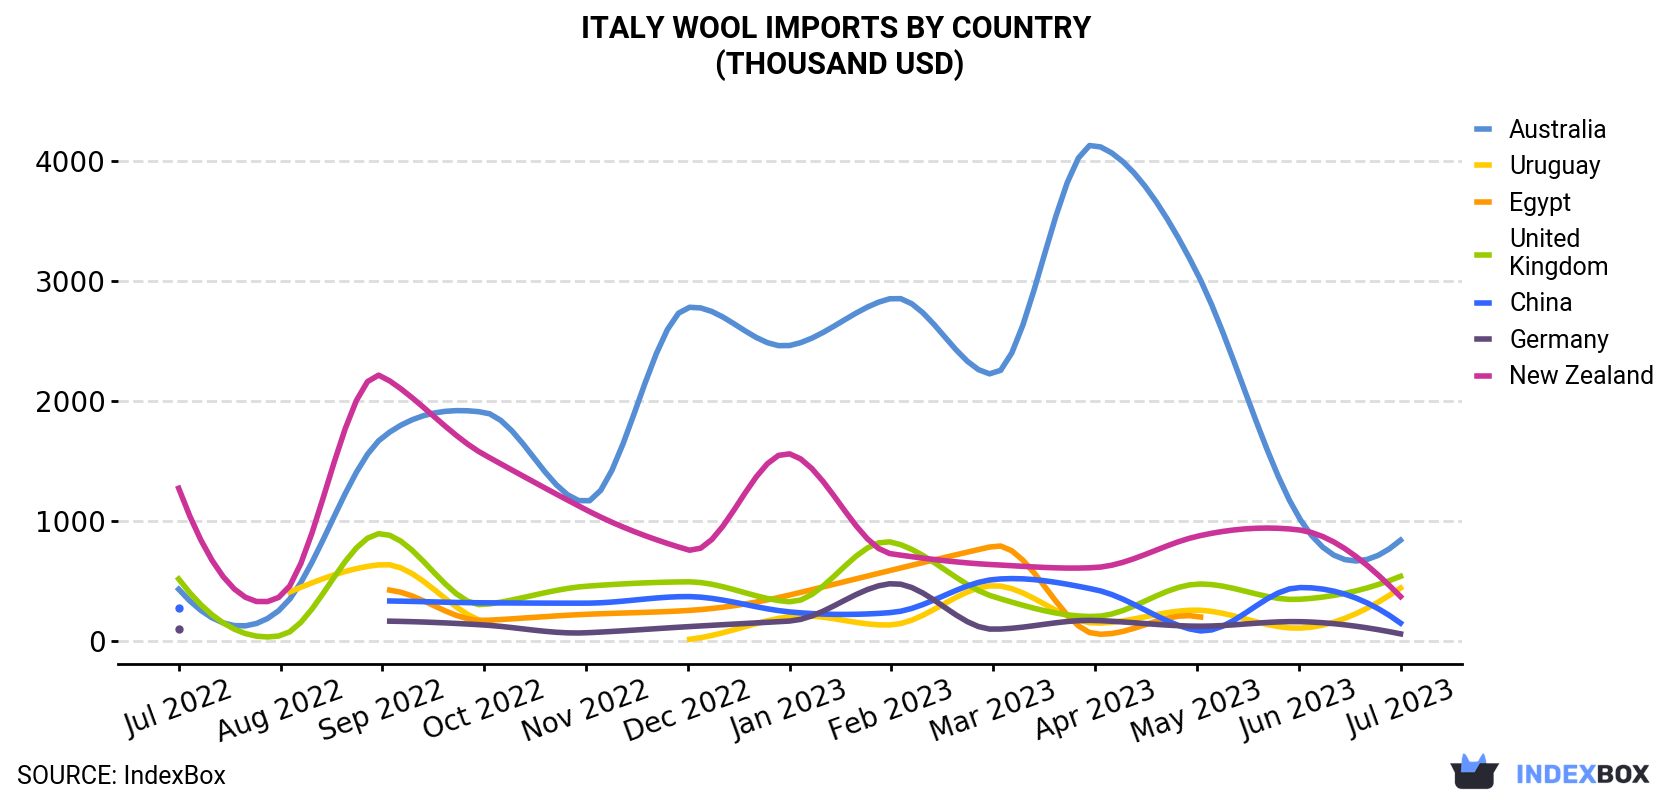 Italy Wool Imports By Country (Thousand USD)